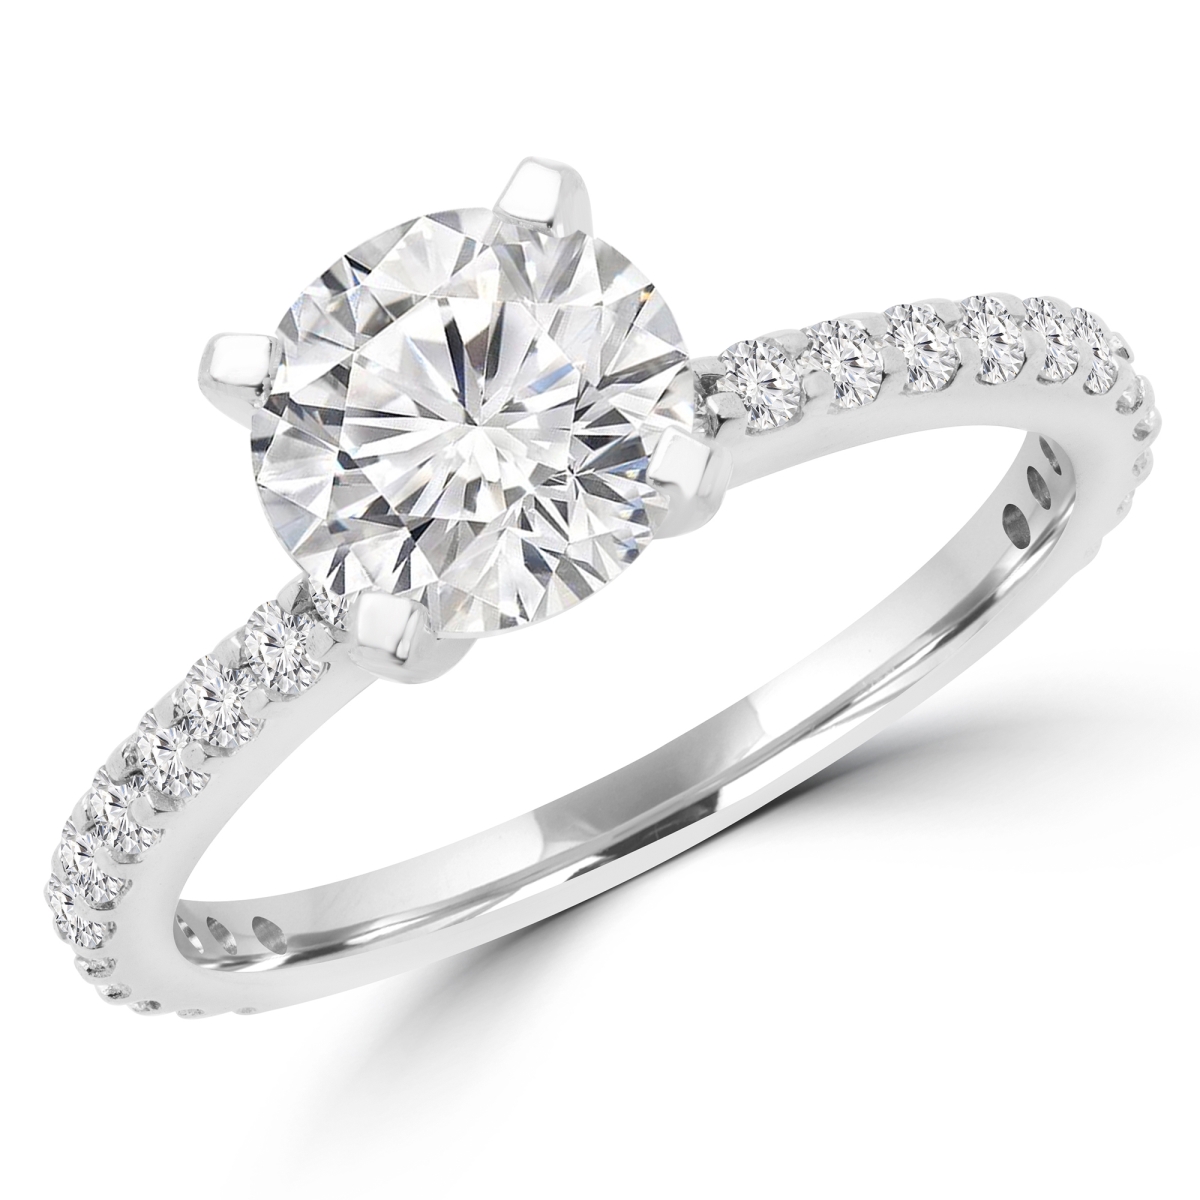 Picture of Majesty Diamonds MD170246-8.25 0.9 CTW Round Diamond Solitaire with Accents Engagement Ring in 14K White Gold - Size 8.25